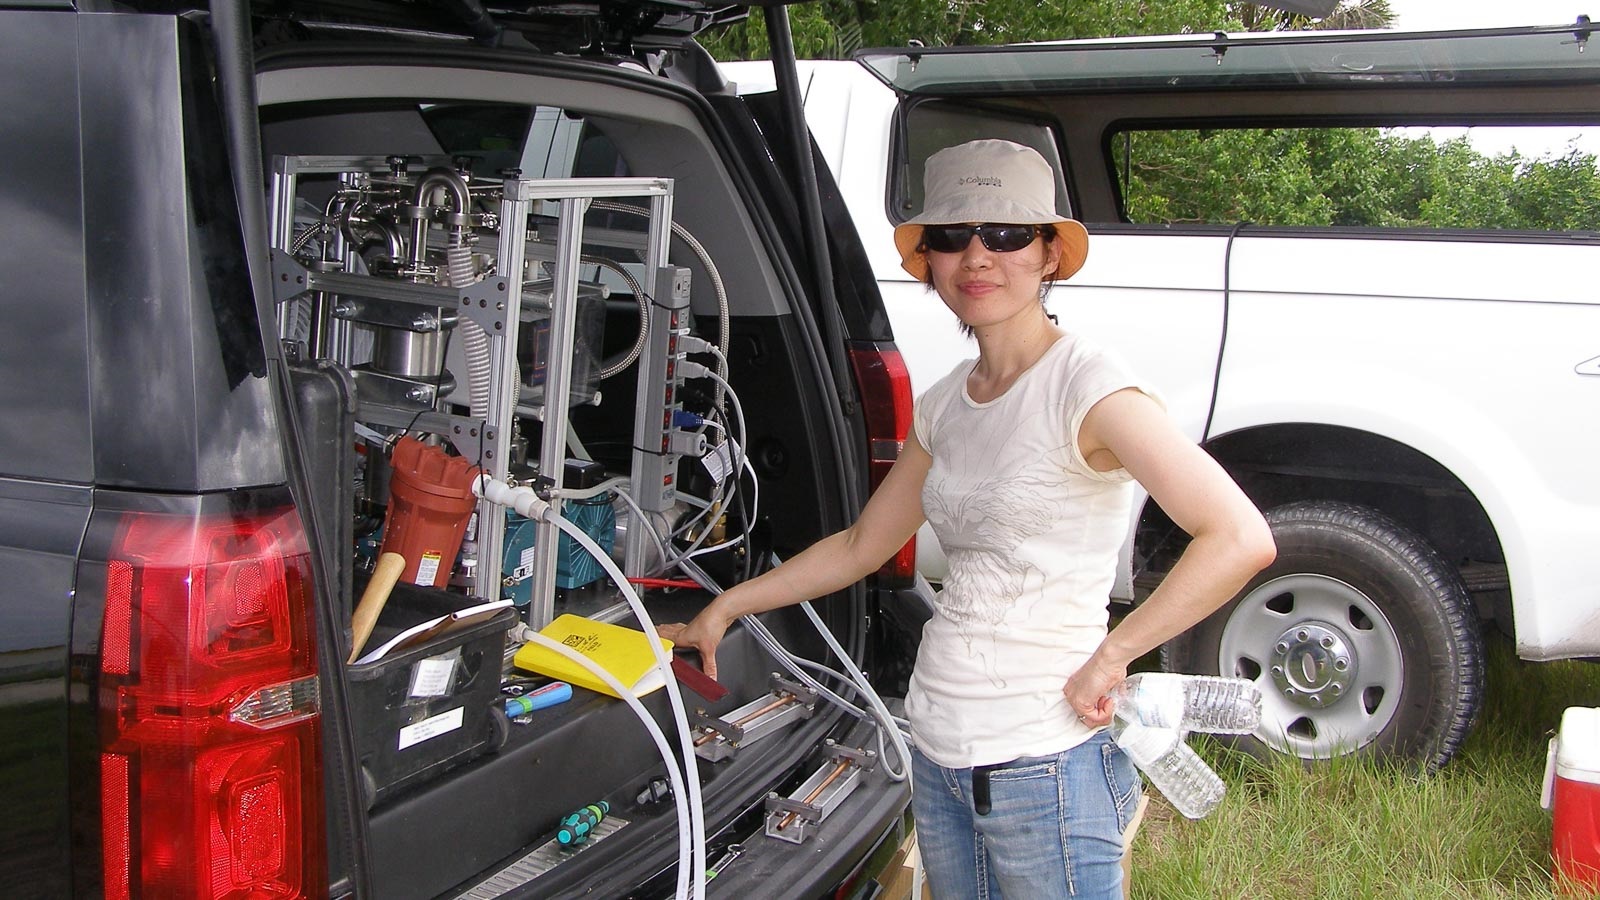 Scientist standing at back of van with equipment. (Image by Argonne National Laboratory.)